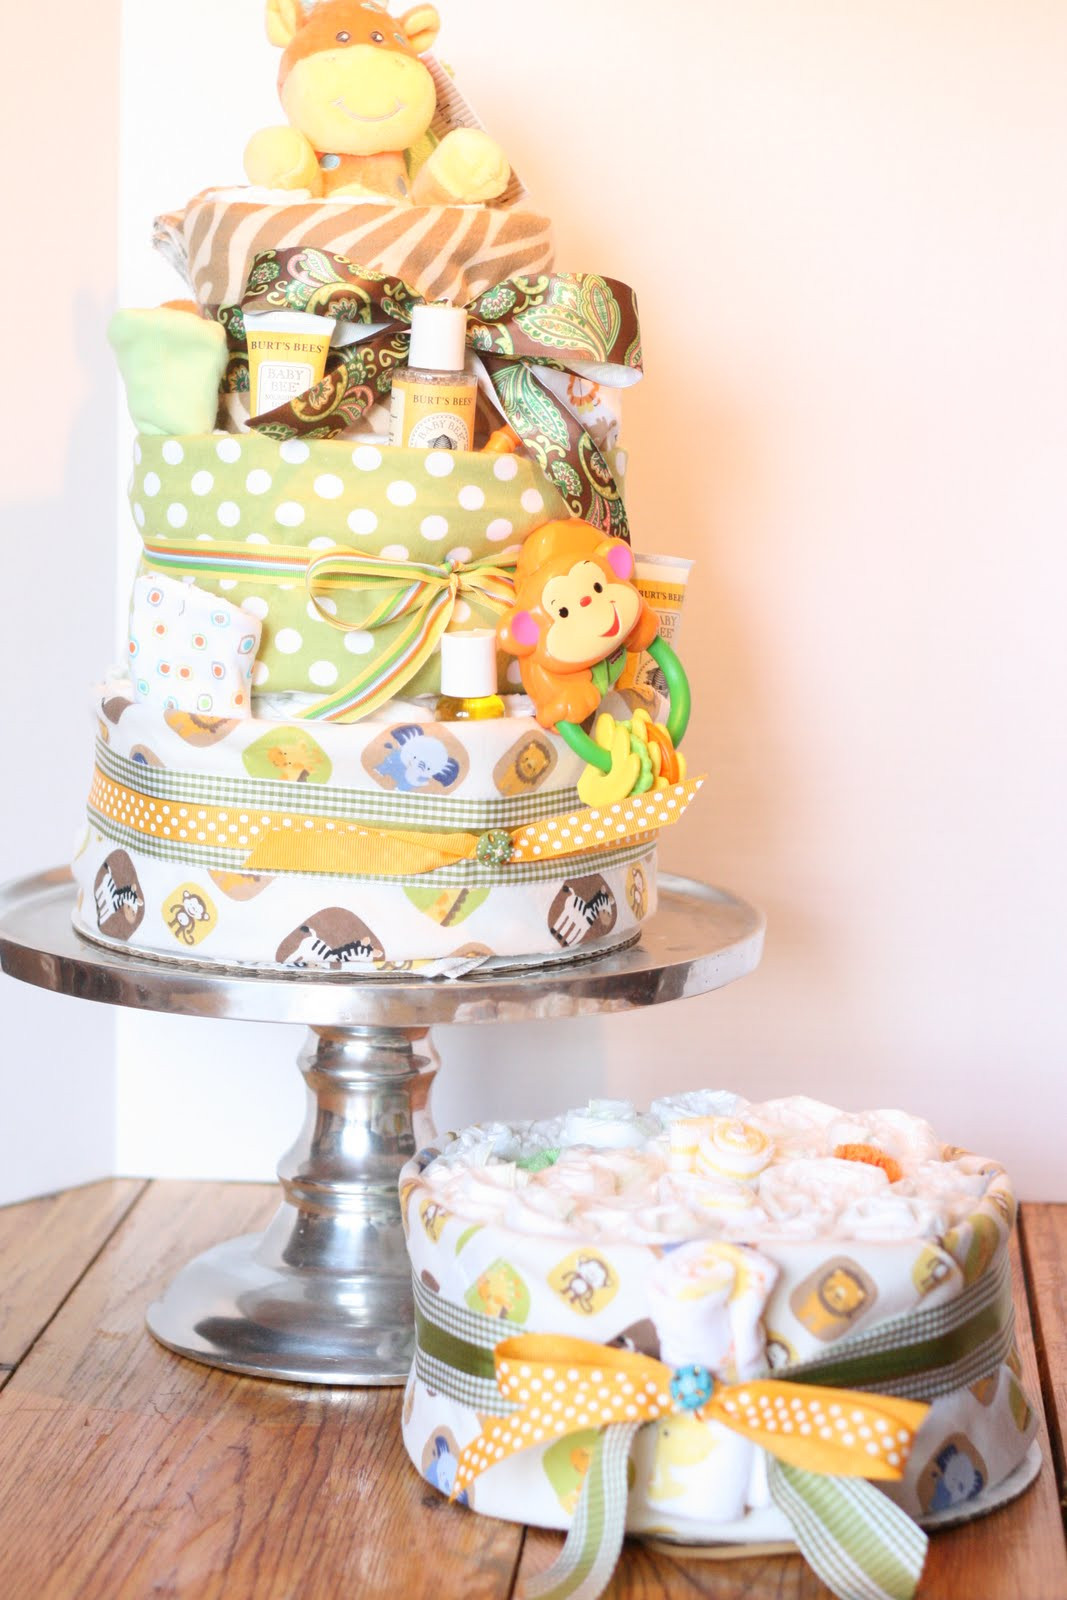 DIY Baby Shower Diaper Cakes
 A Little Junk In My Trunk How to Make a Diaper Cake